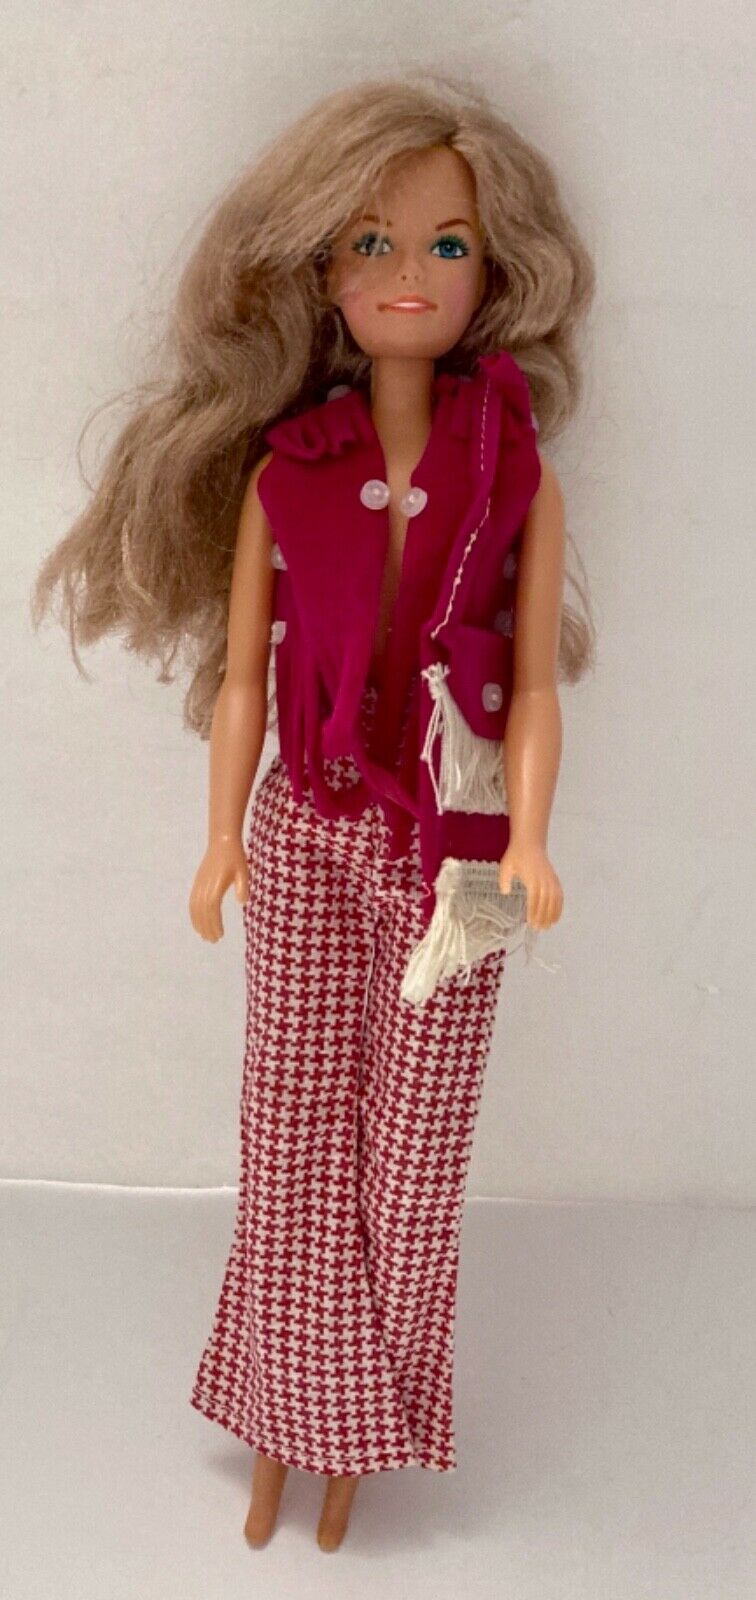 Barbie Type Unbranded 12” Redressed Blonde Fashion Doll - Estate Closing Sale